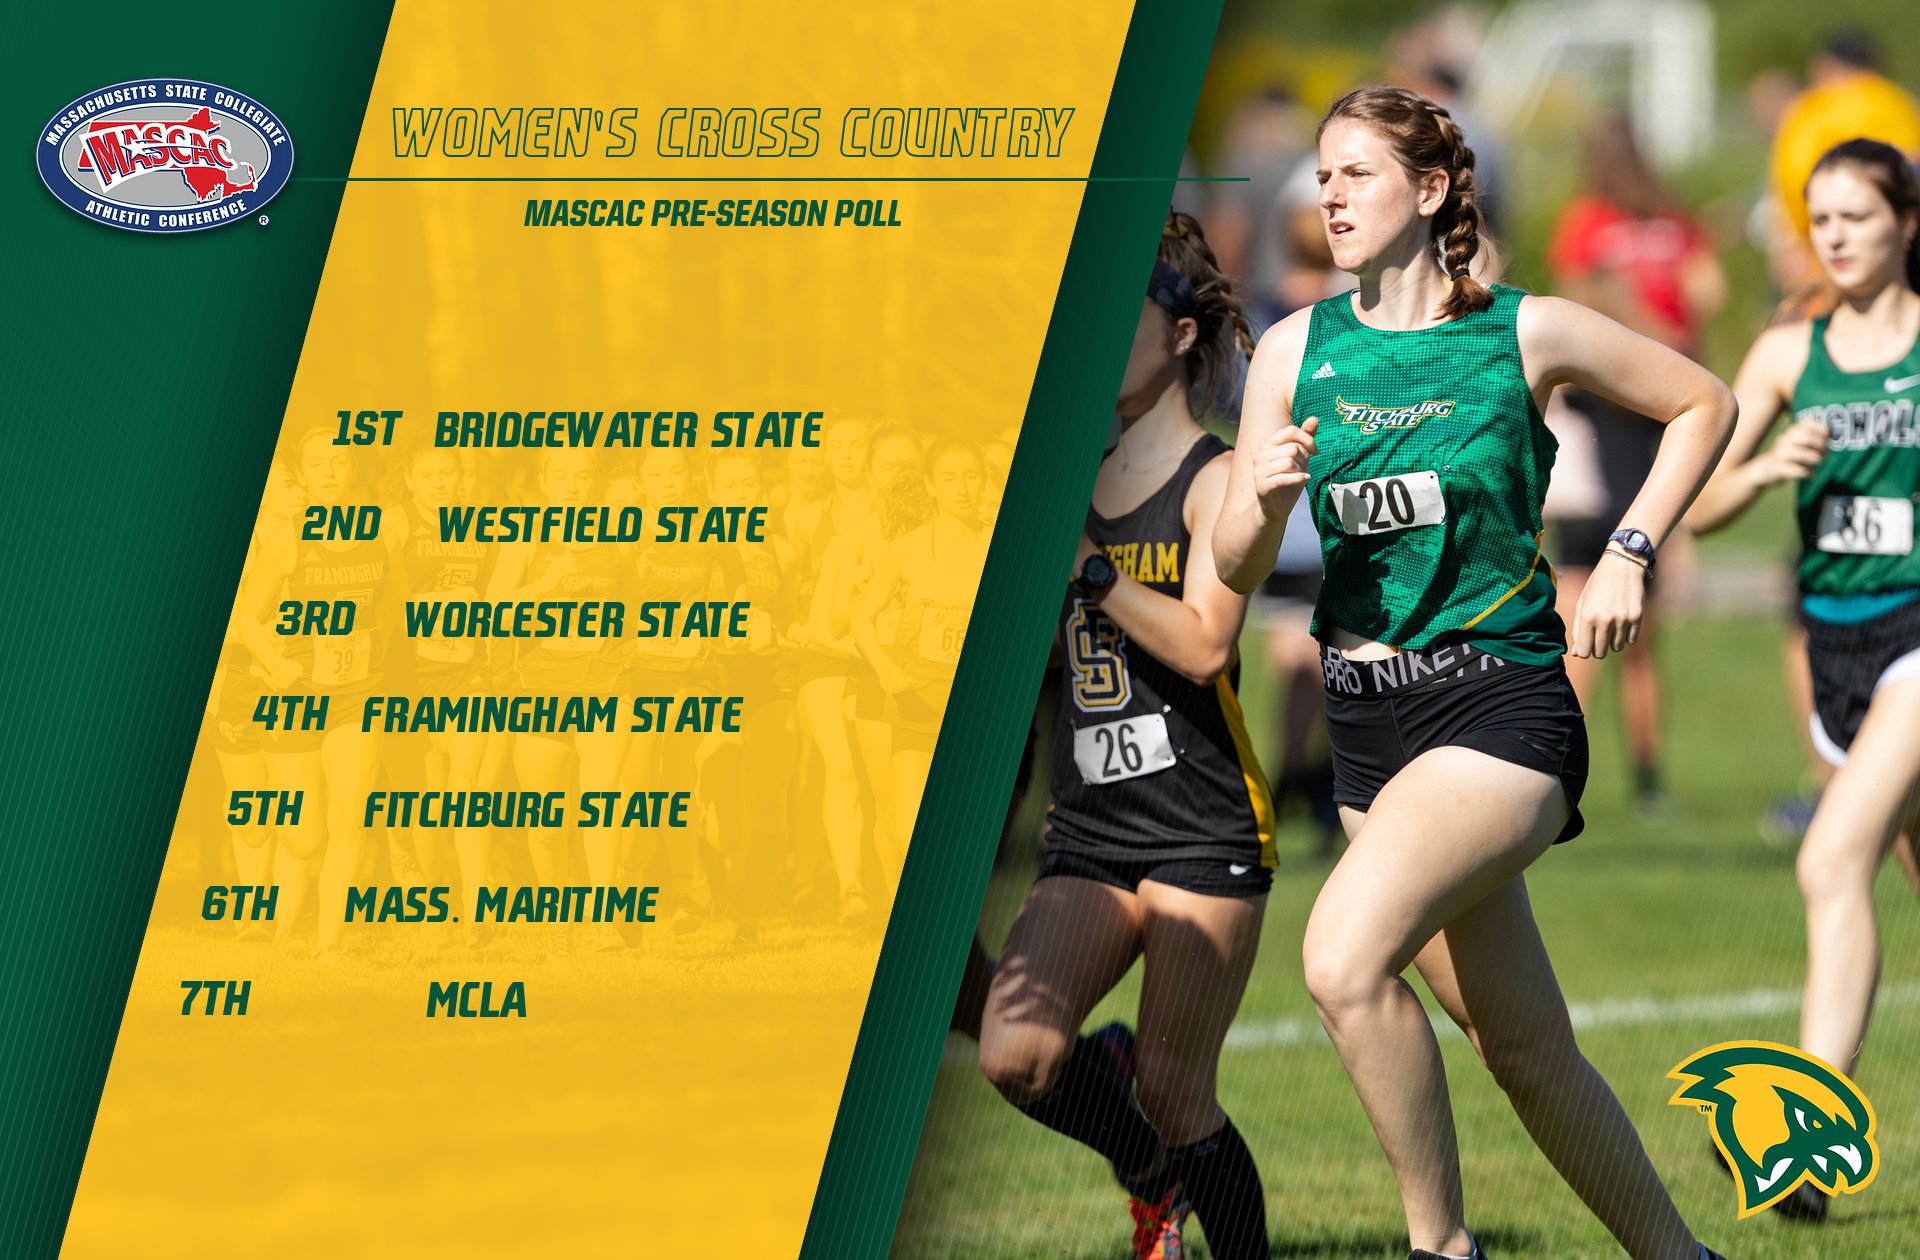 Falcons Picked Fifth In MASCAC WXC Pre-Season Poll